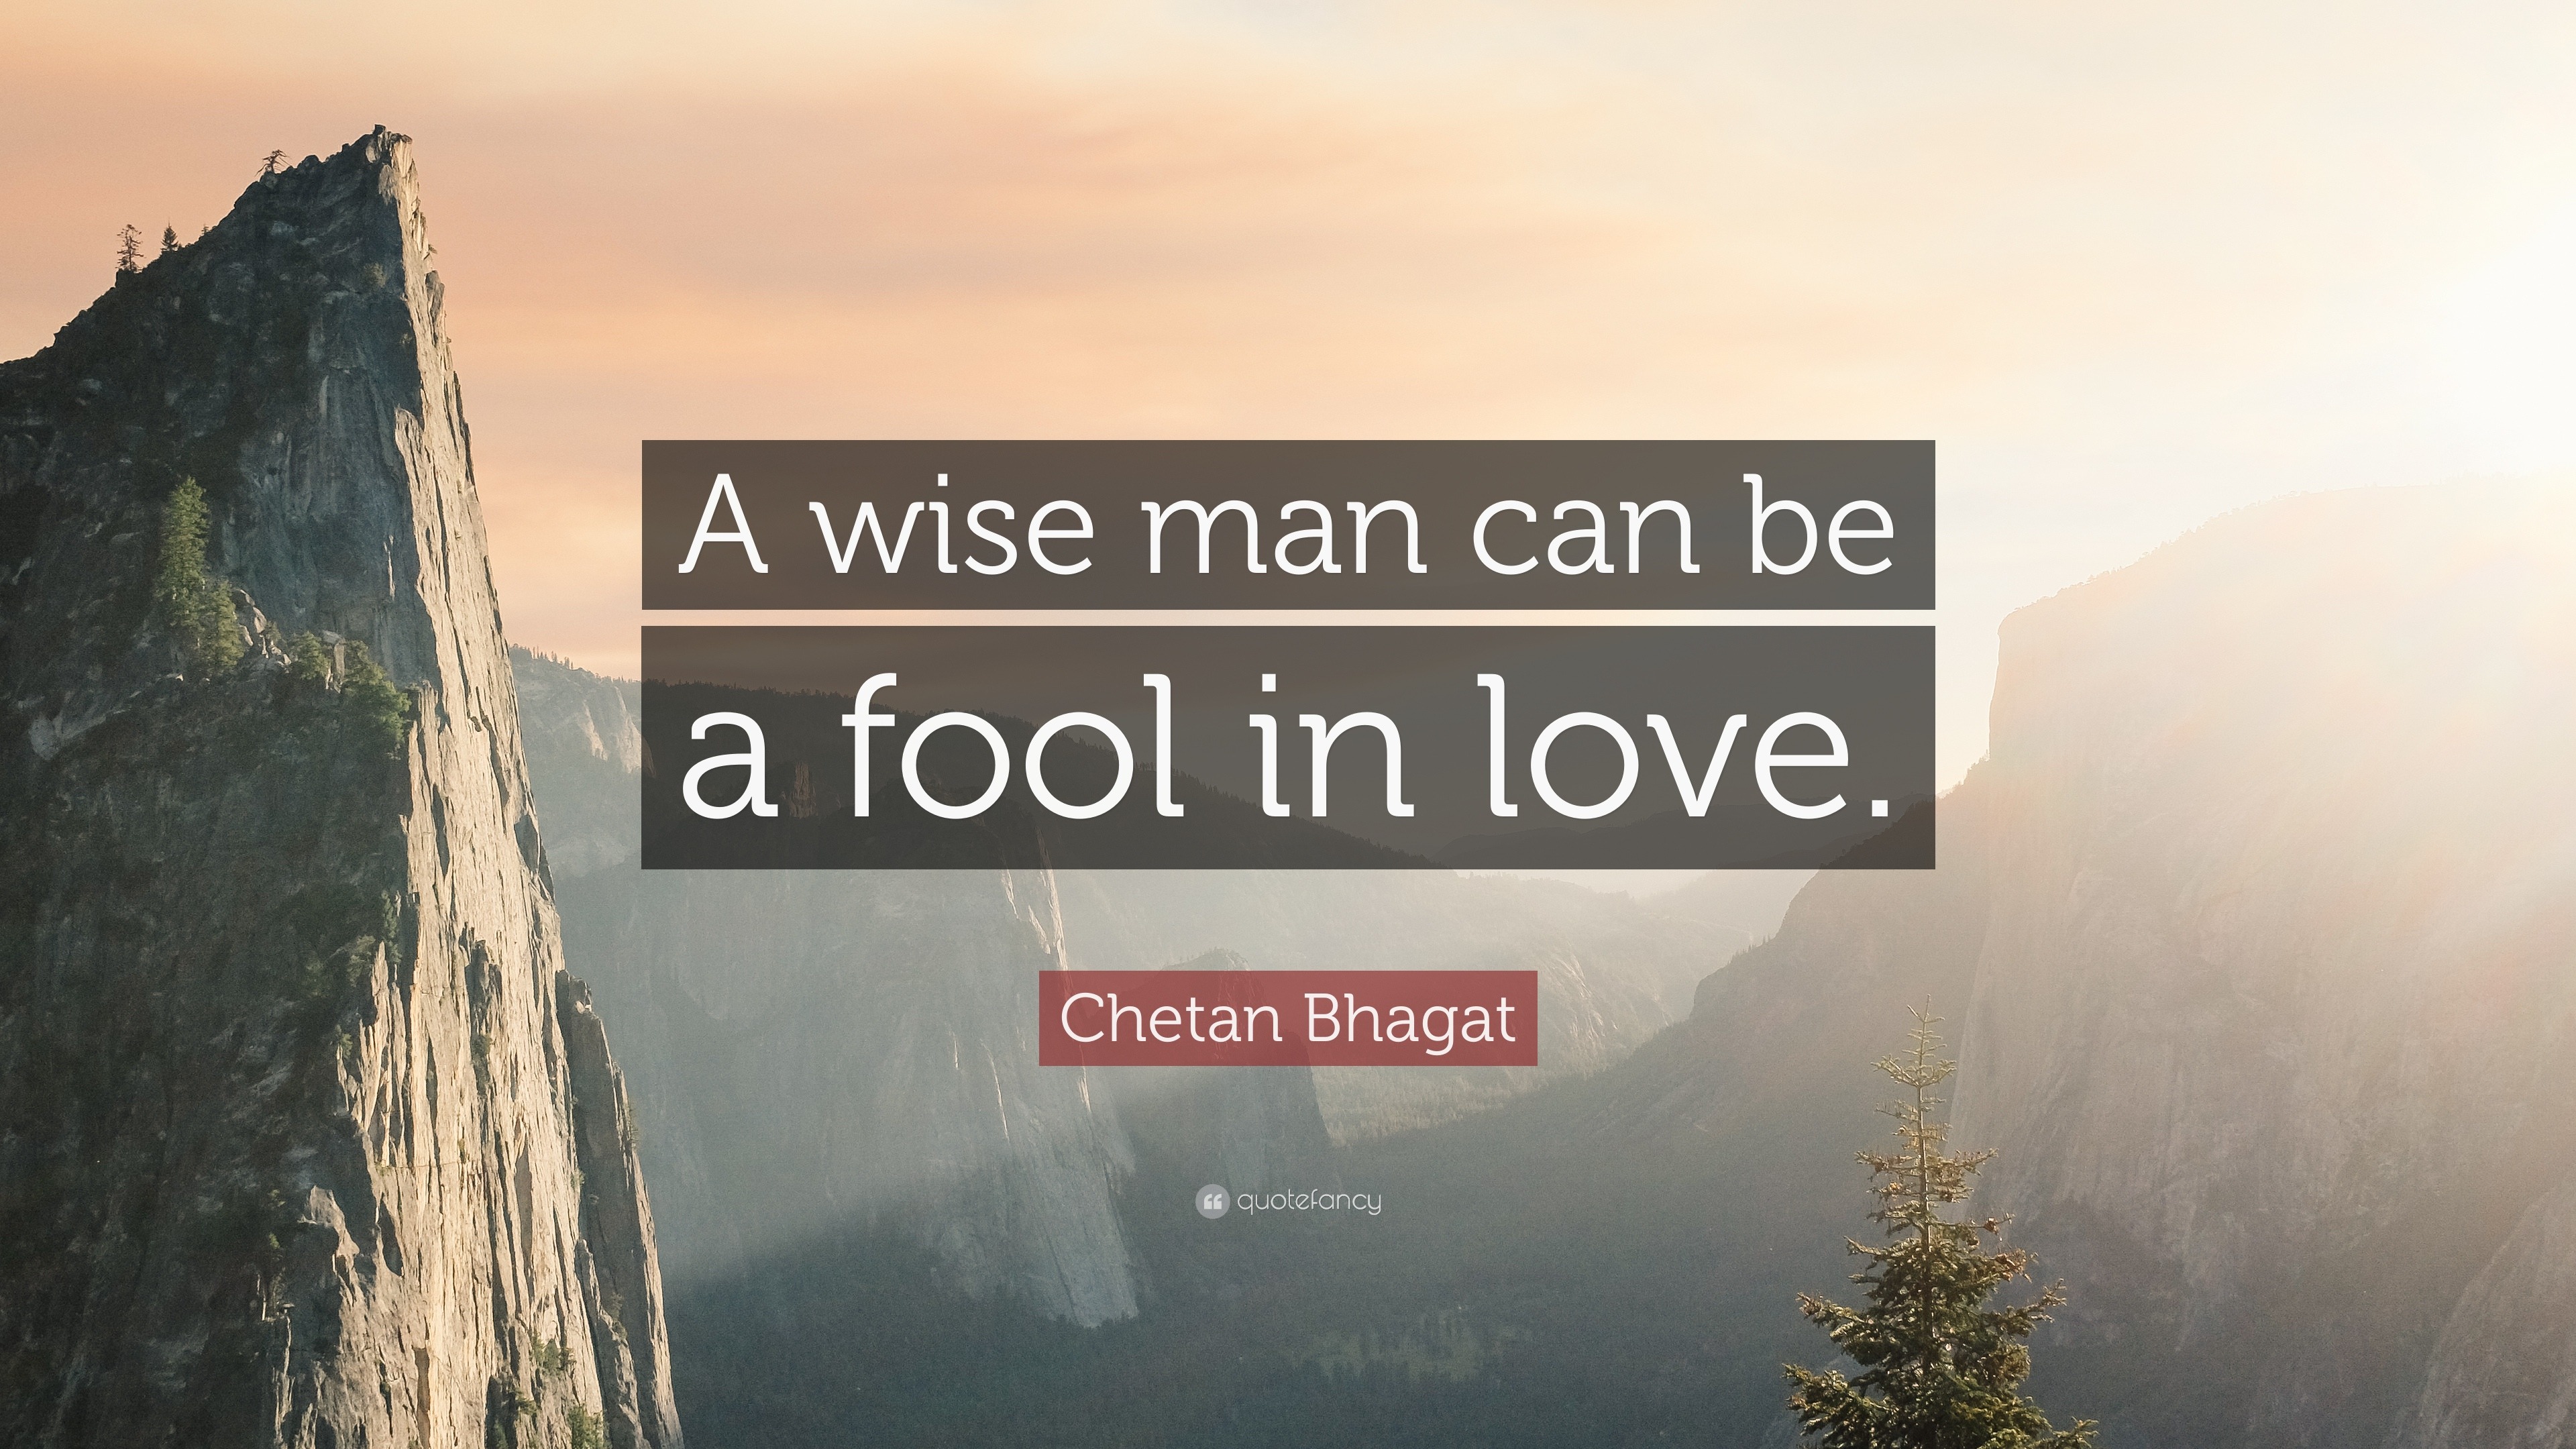 Chetan Bhagat Quote: "A wise man can be a fool in love."